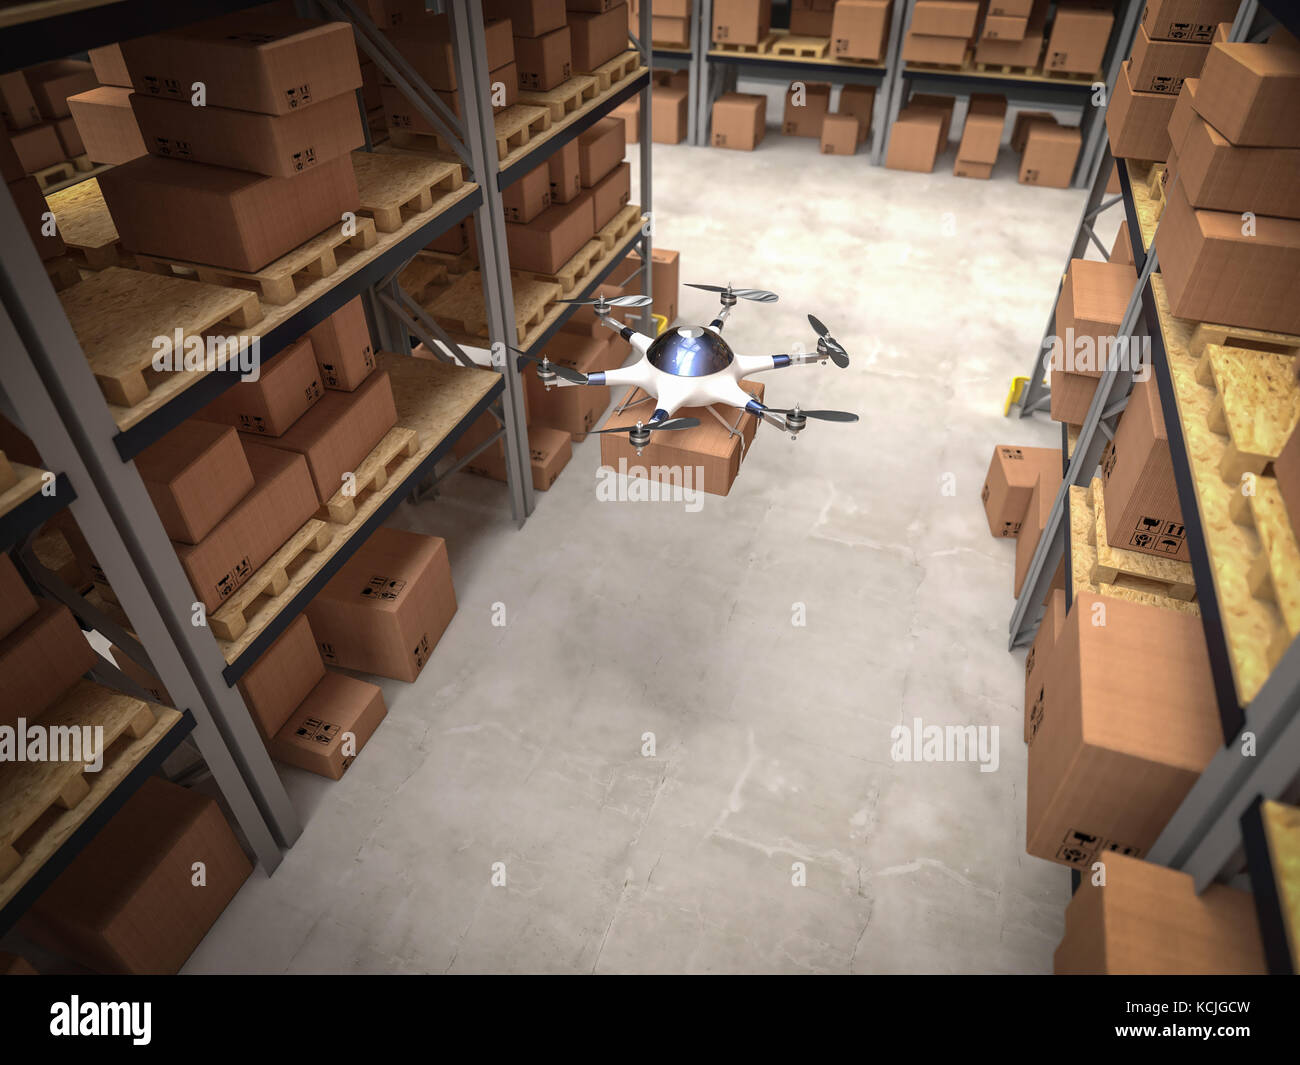 modern drone work in warehouse 3d rendering image Stock Photo